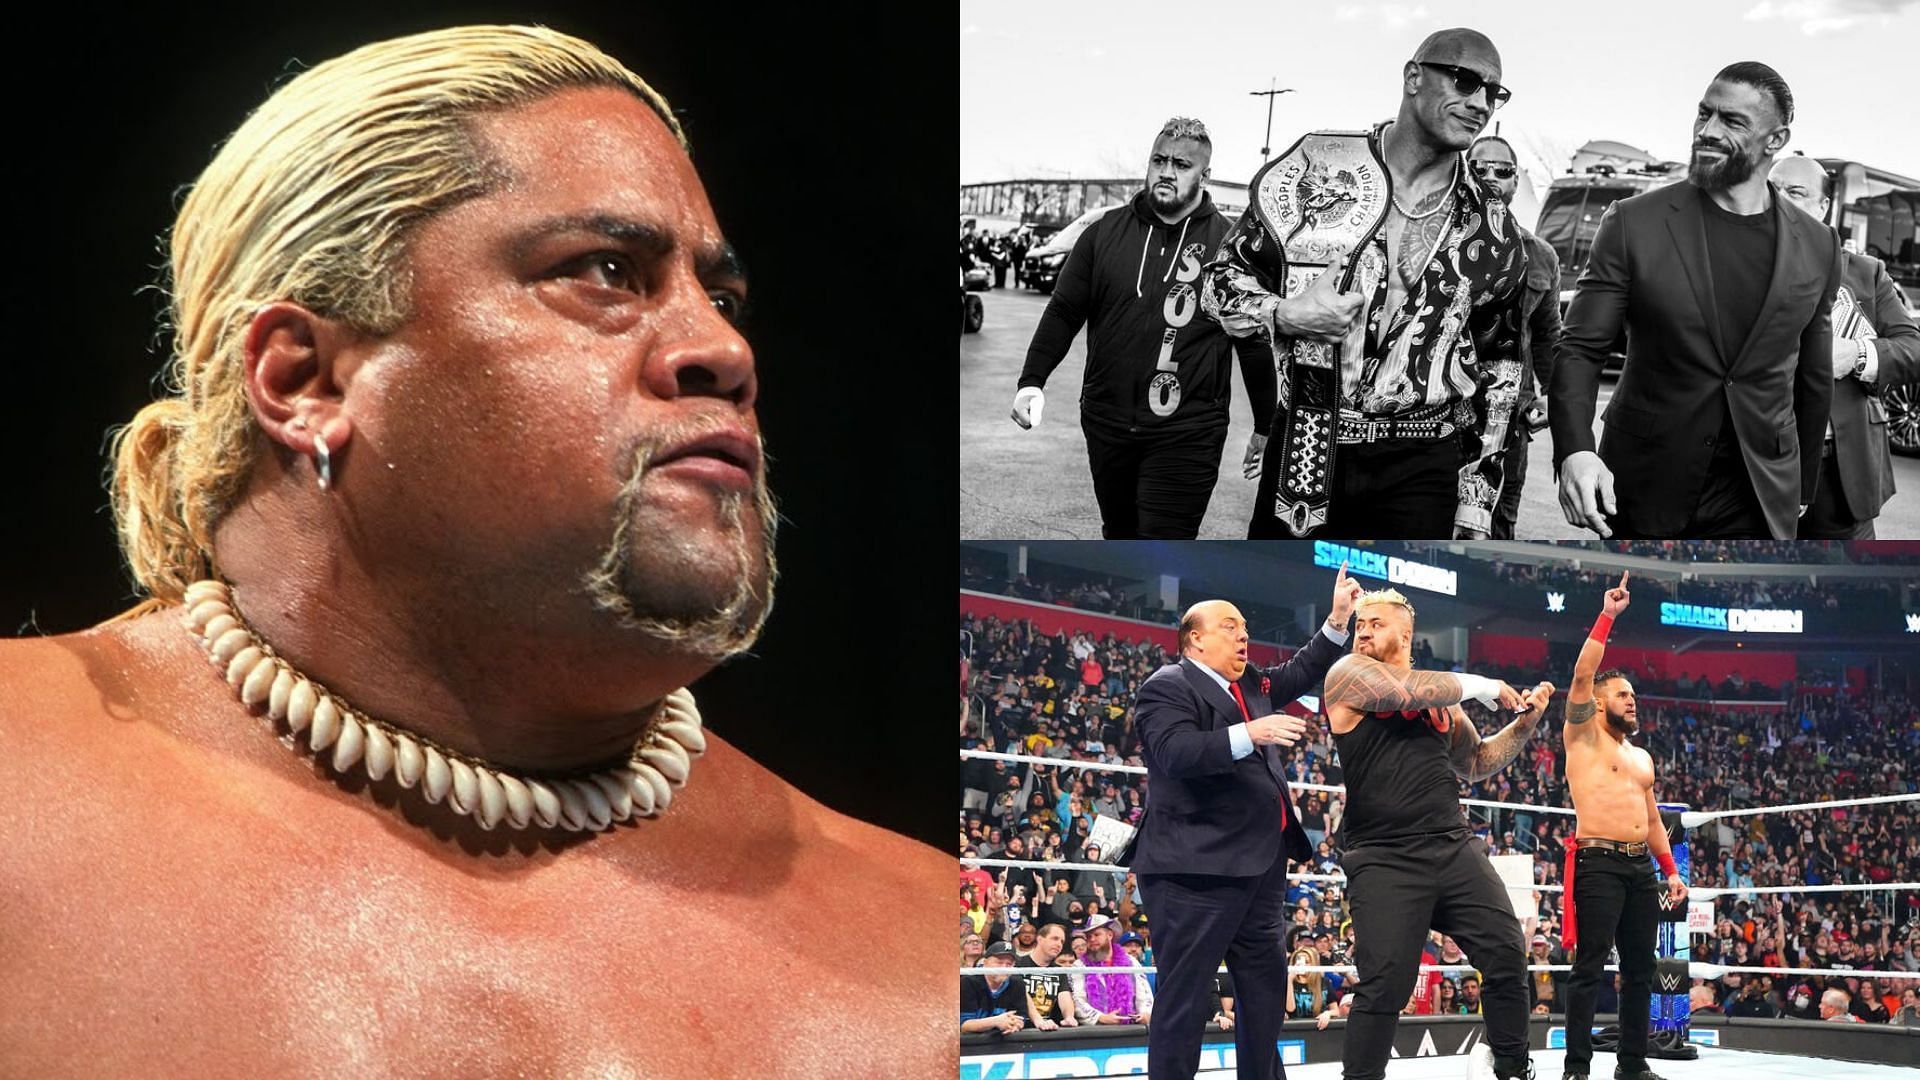 Rikishi is a member of the legendary Anoa